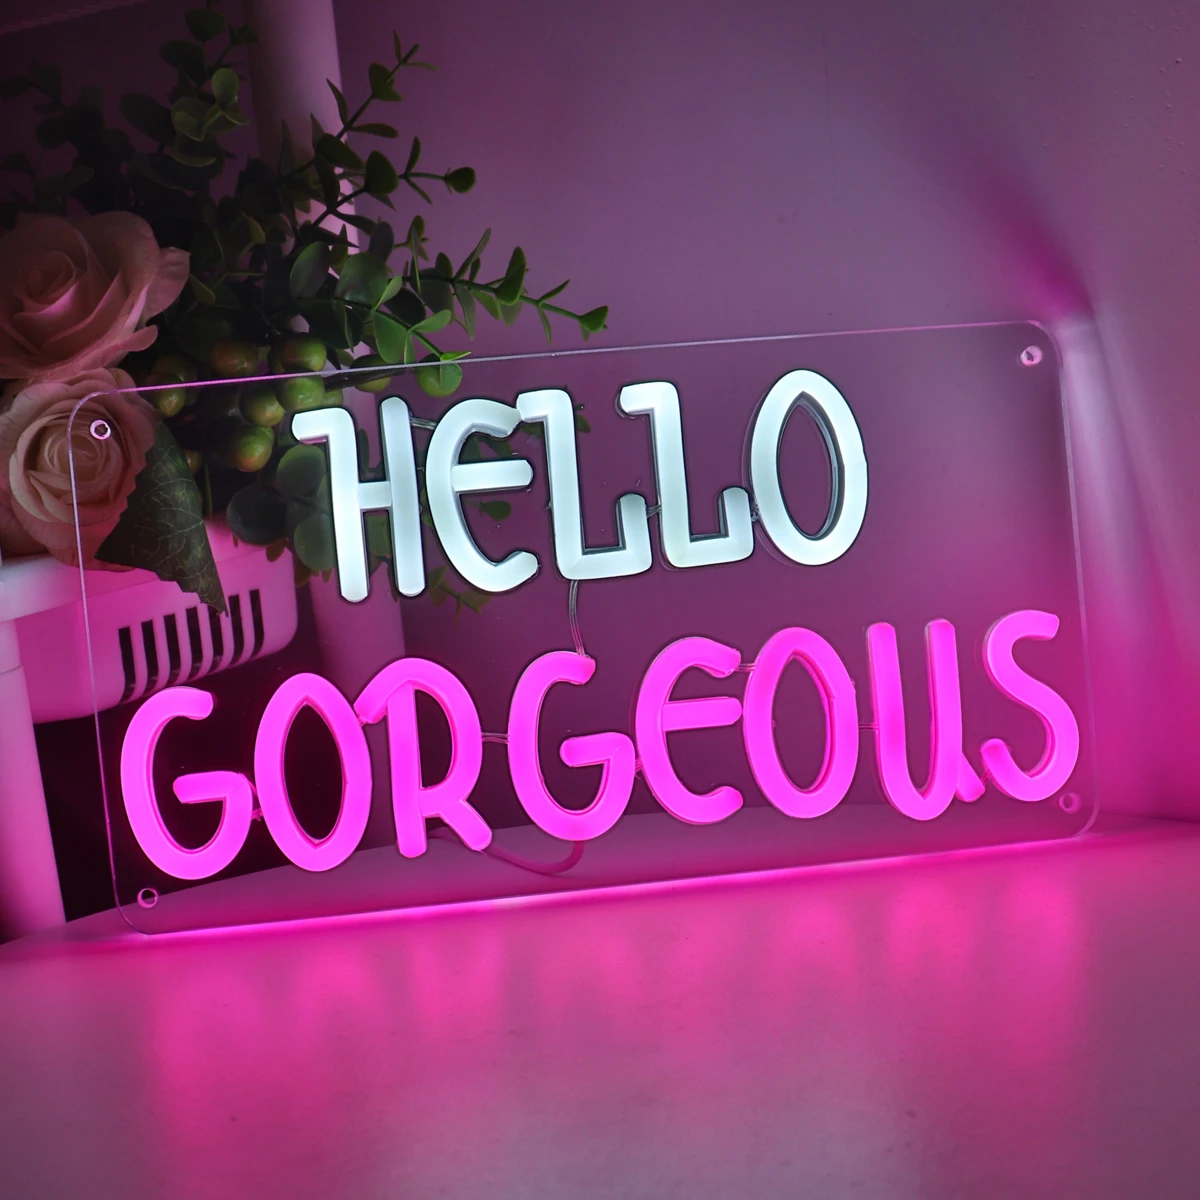 1PC Super Bright Hello Gorgeous Wall LED Neon Art Sign For Girls Room Party Shop Saloon Gallery Decoration 11.22''*5.98''